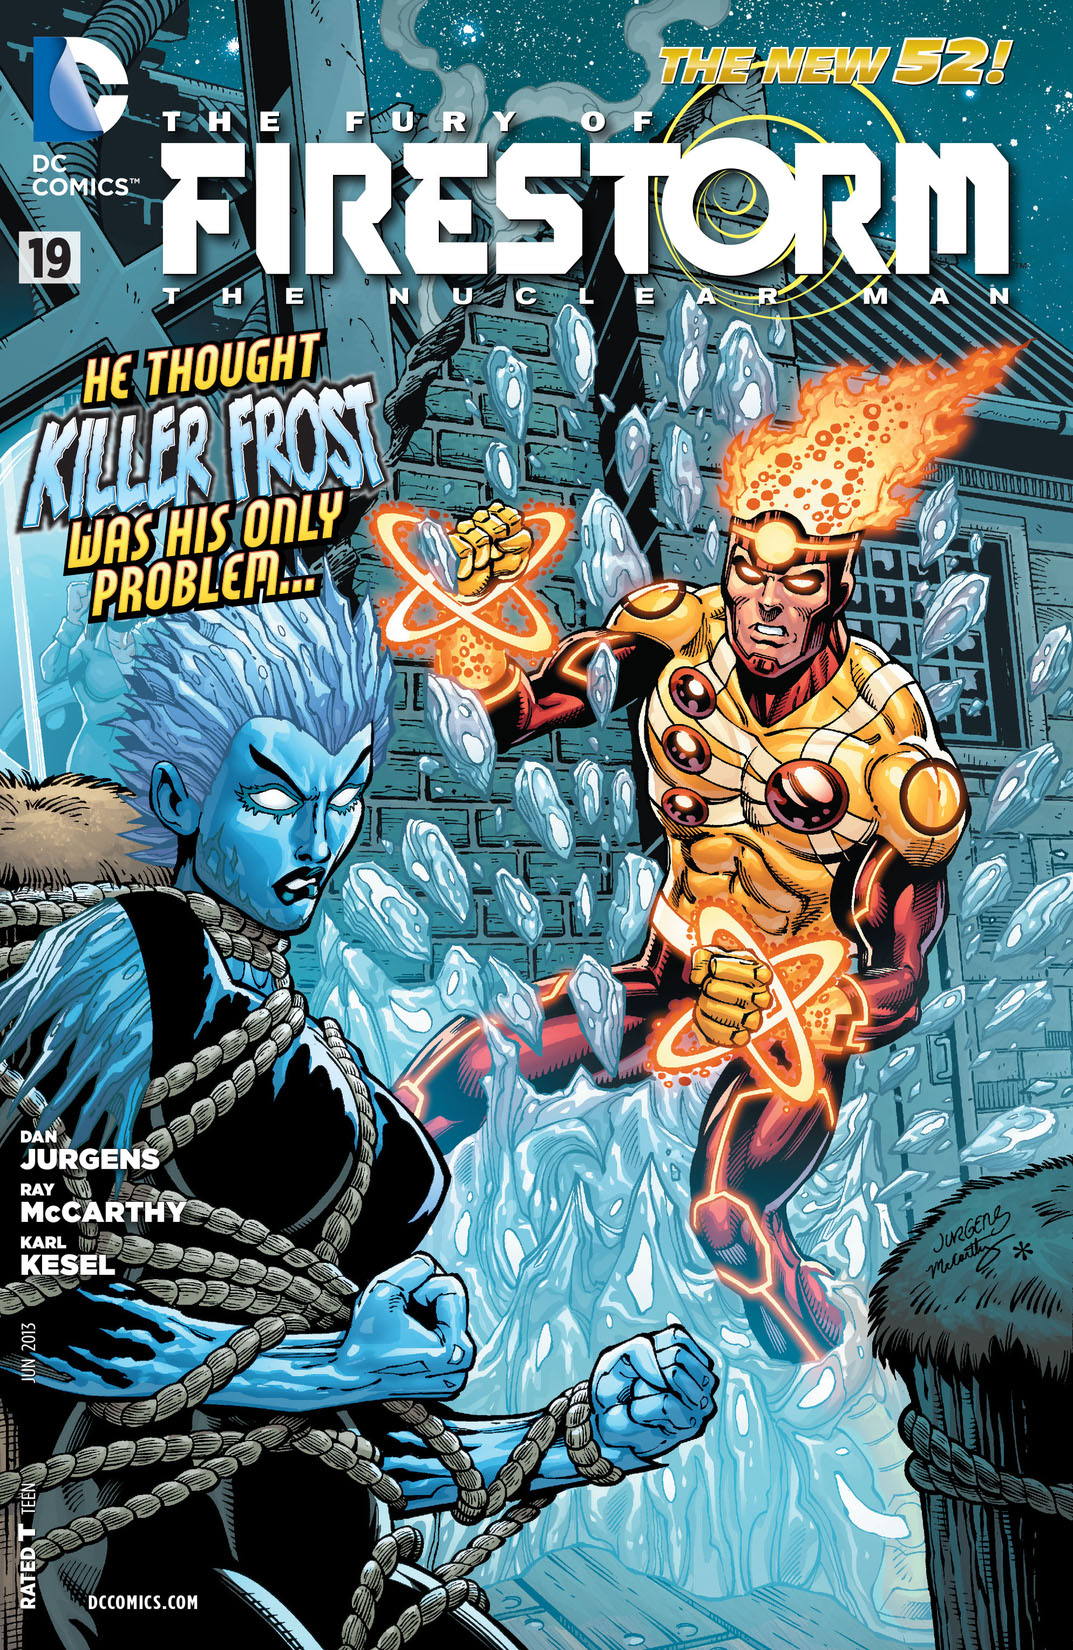 The Fury of Firestorm: The Nuclear Man #19 preview images